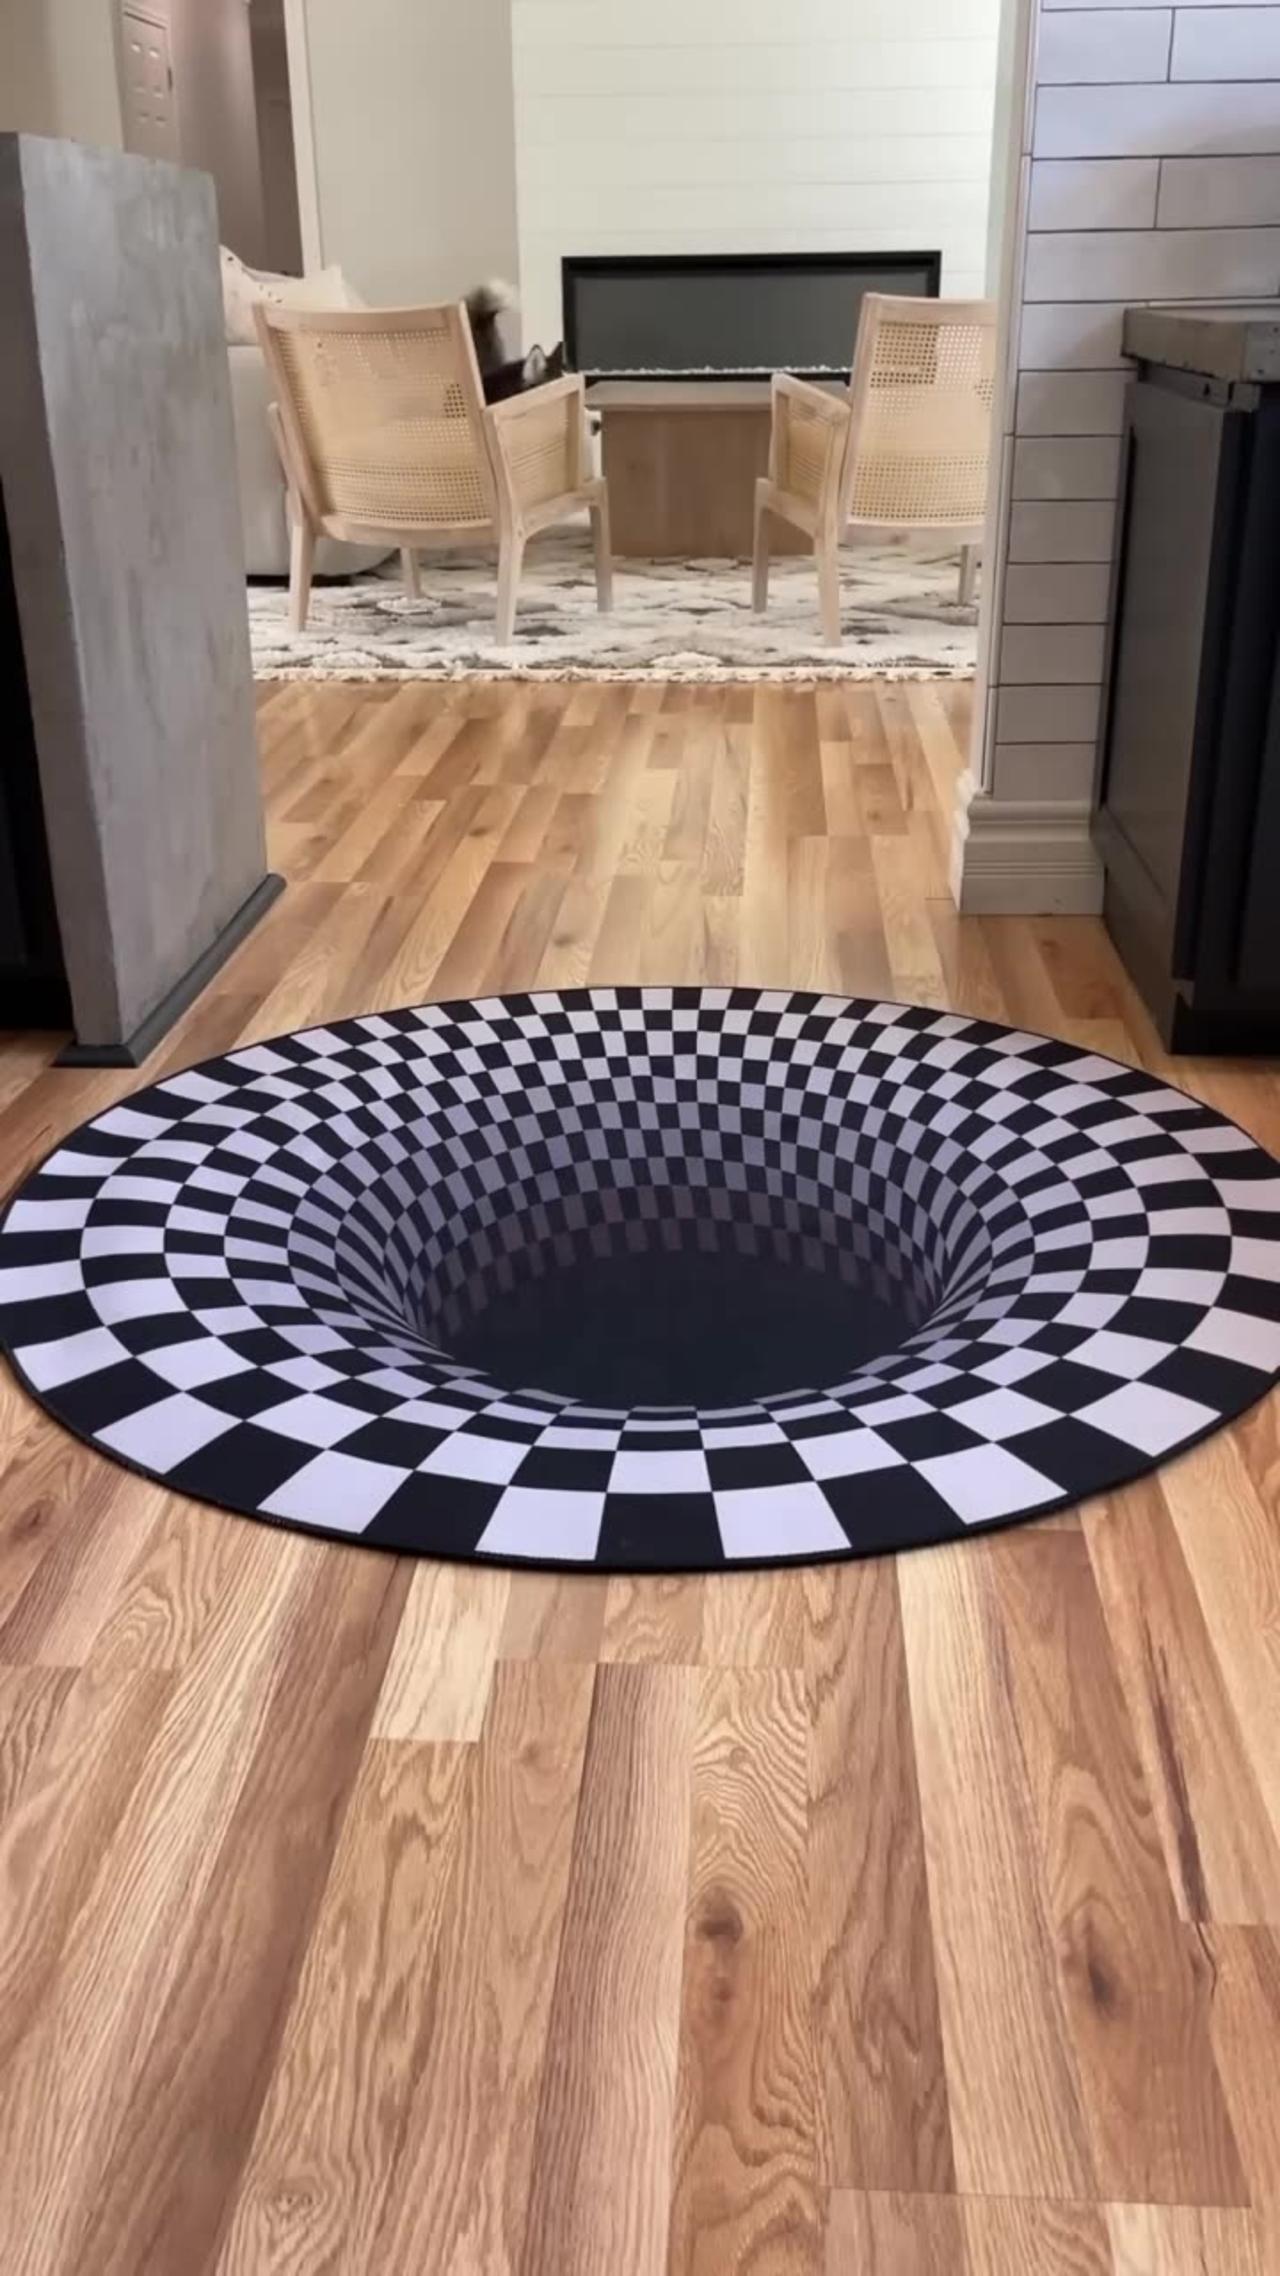 Dogs funny reaction to entering optical illusion rug! #shorts